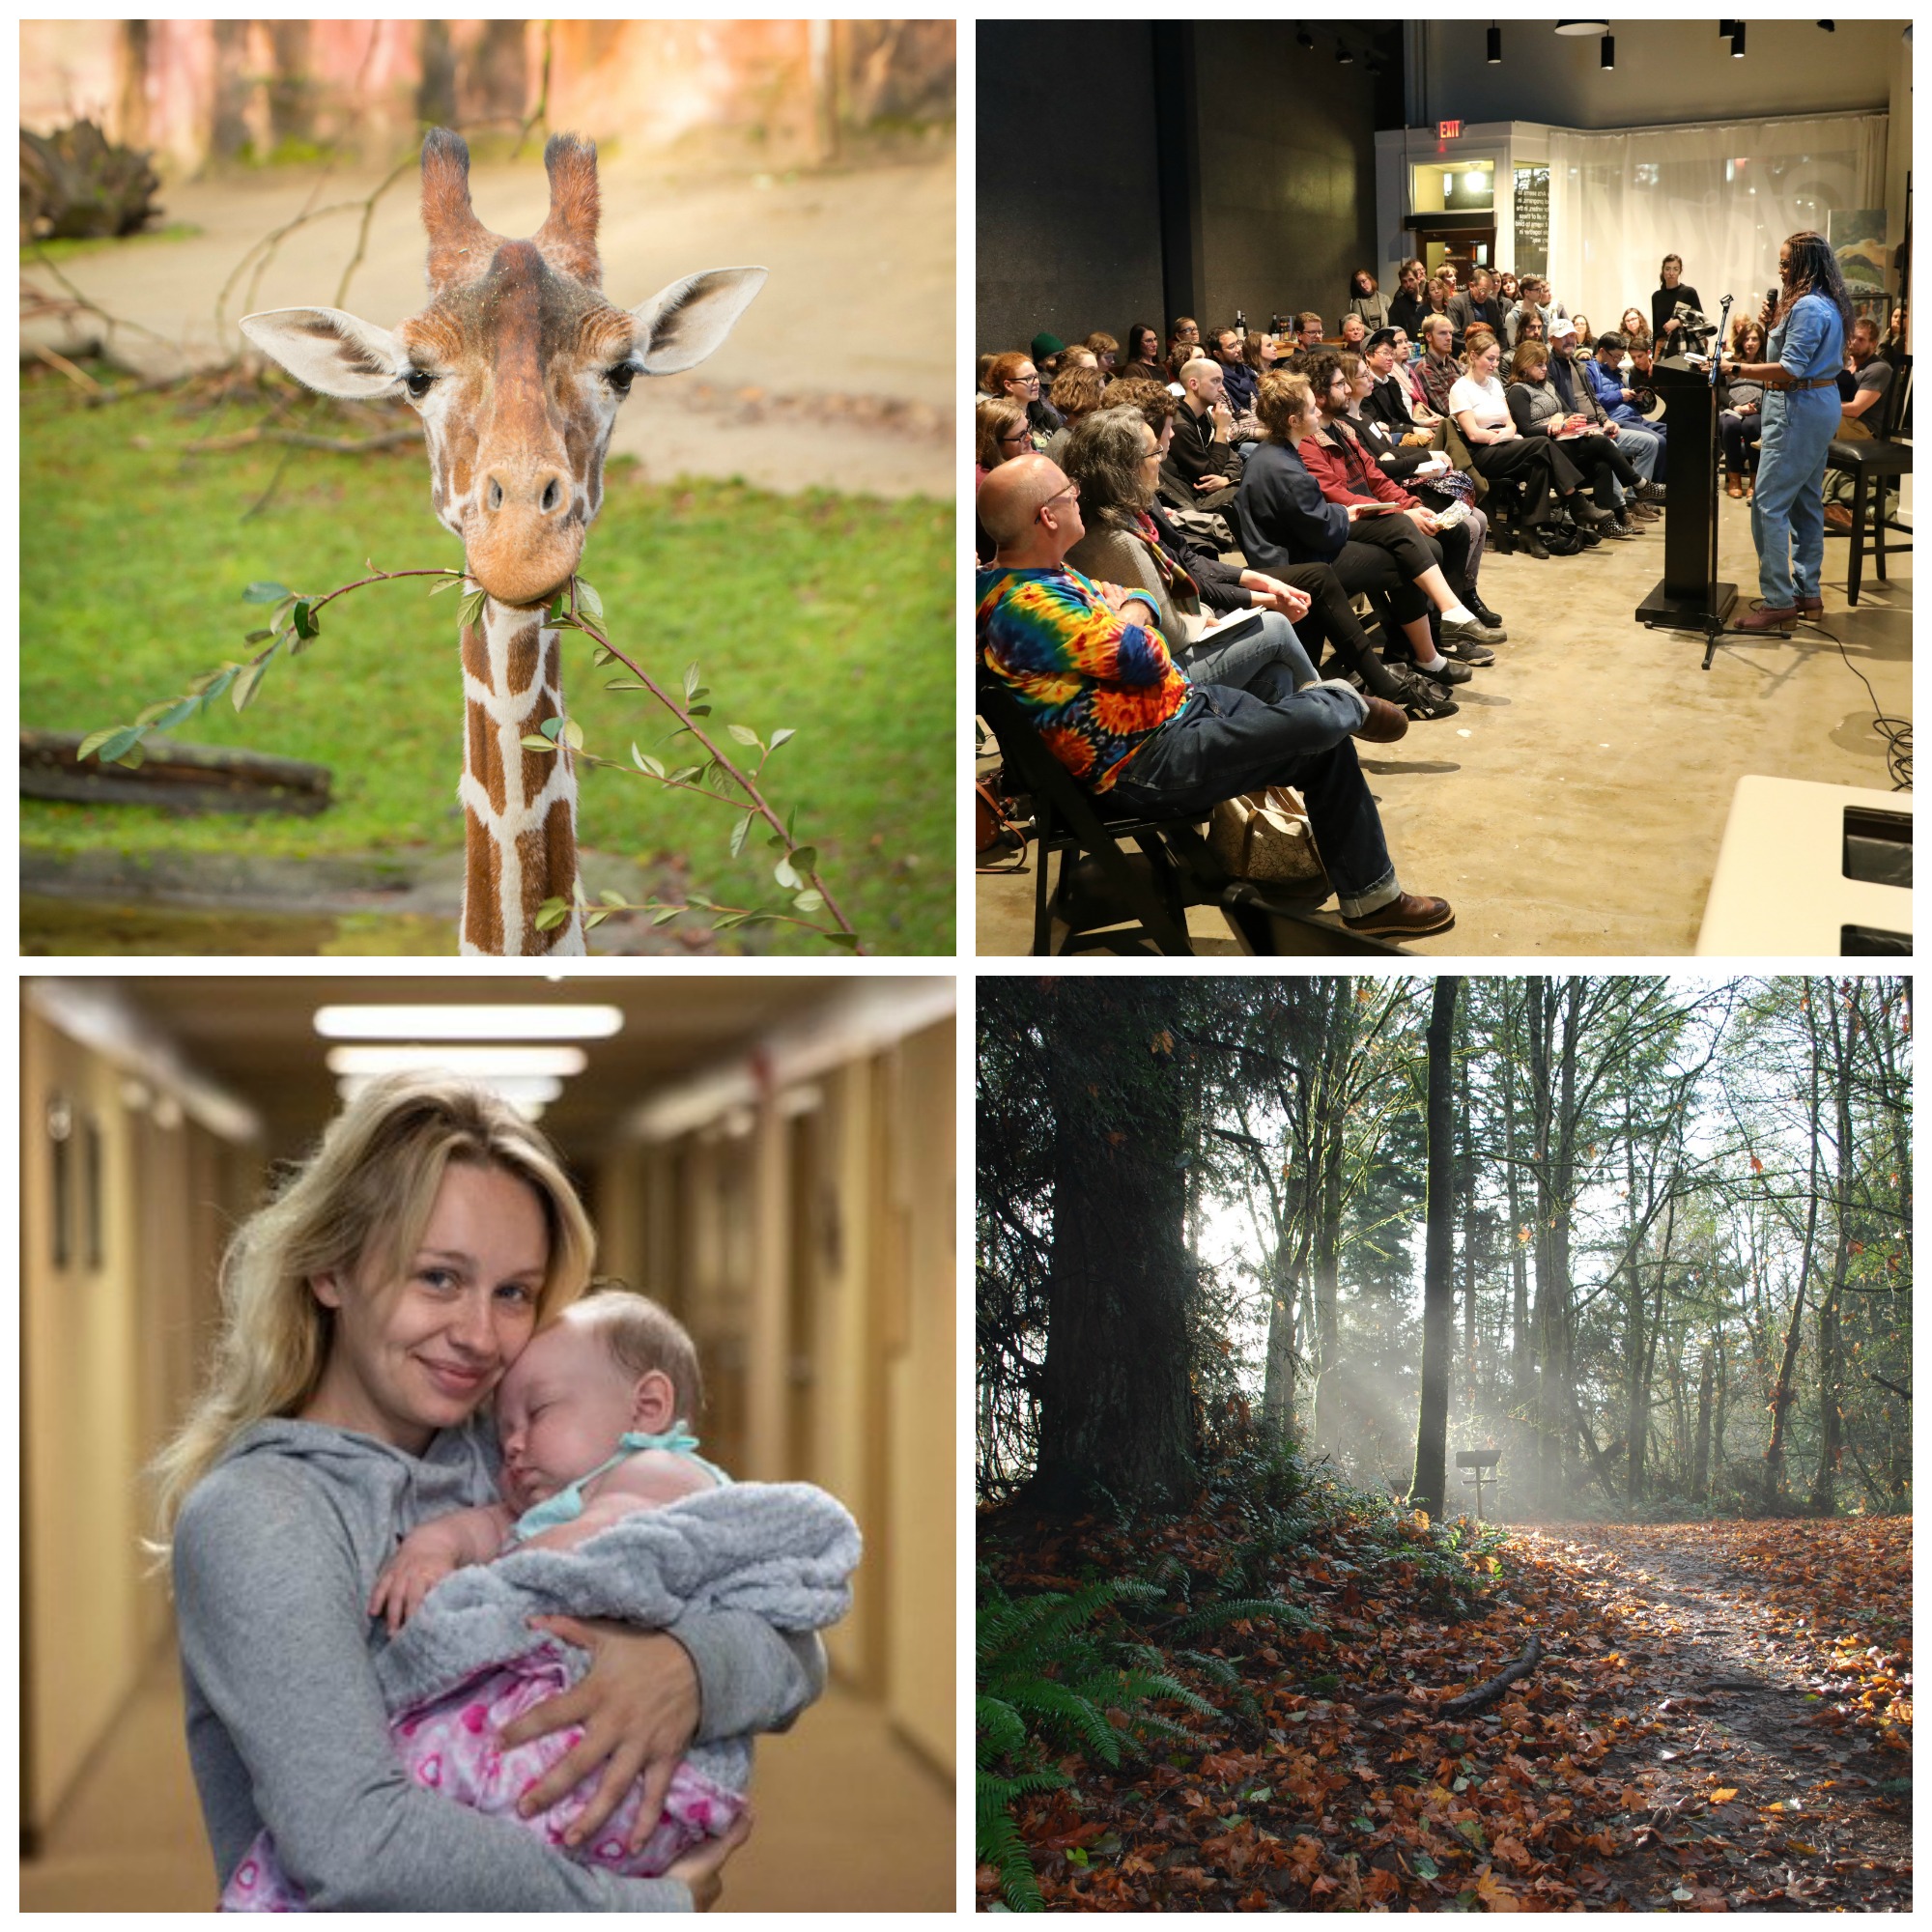 Image 1: a close-up shot of a giraffe looking straight at the camera holding a twig in its mouth. Image 2: a young woman with blond hair wearing a gray sweatshirt smiles at the camera while holding a young baby wrapped in a gray and pink blanket. Image 3: an audience looks at a person wearing jeans and a blue shirt giving a talk. Image 4: an outdoor shot of a path through the woods. 